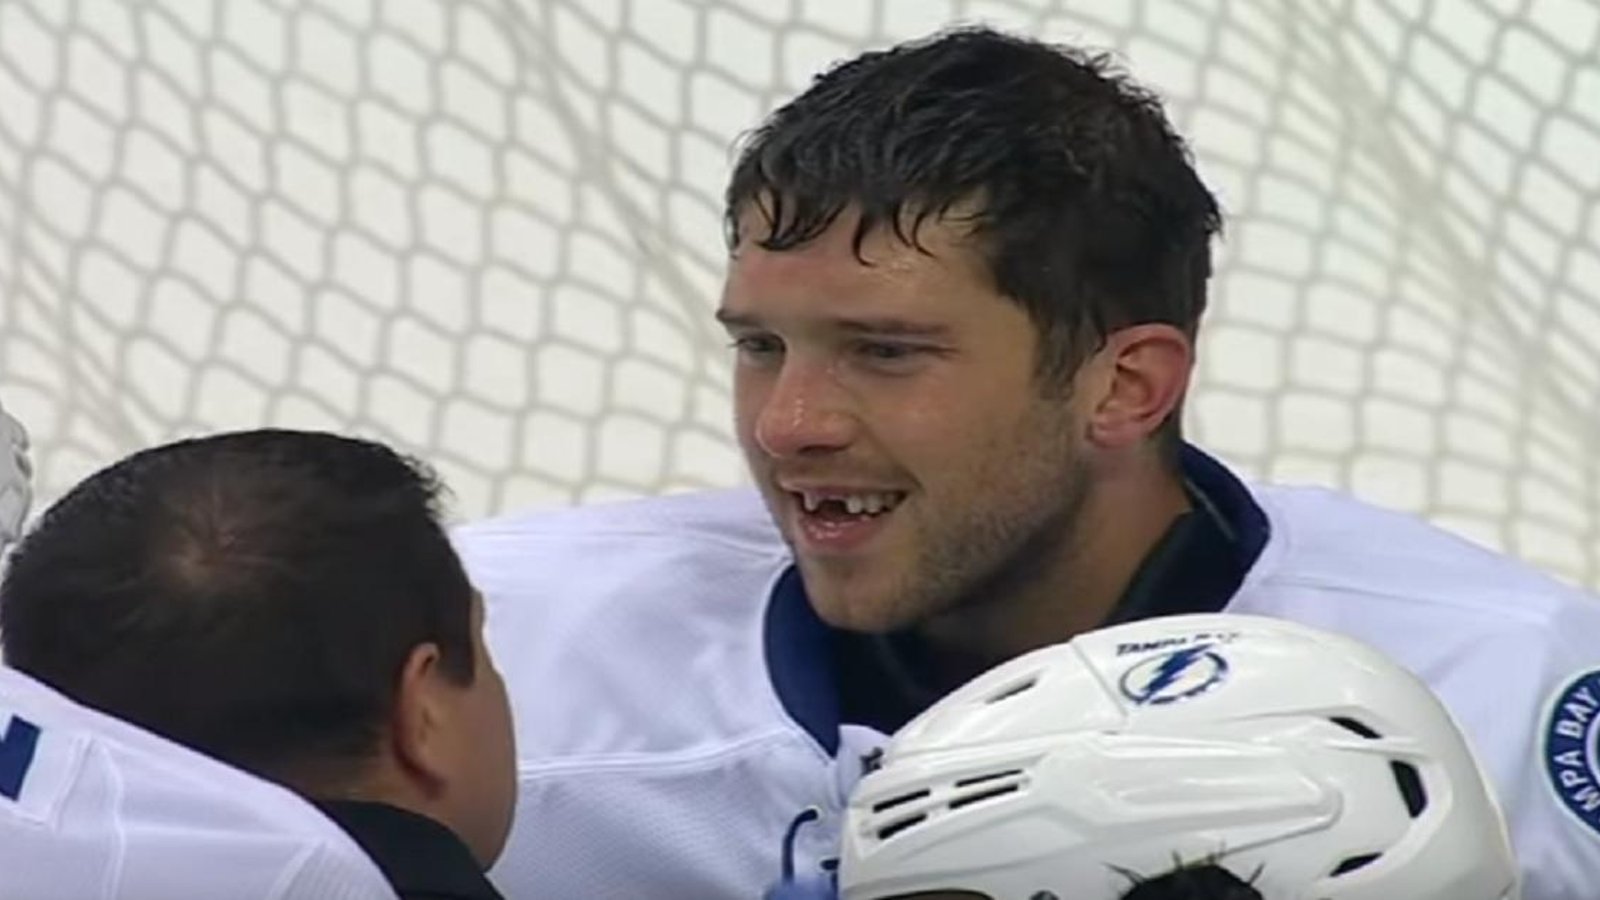 Goalie loses two front teeth after making save